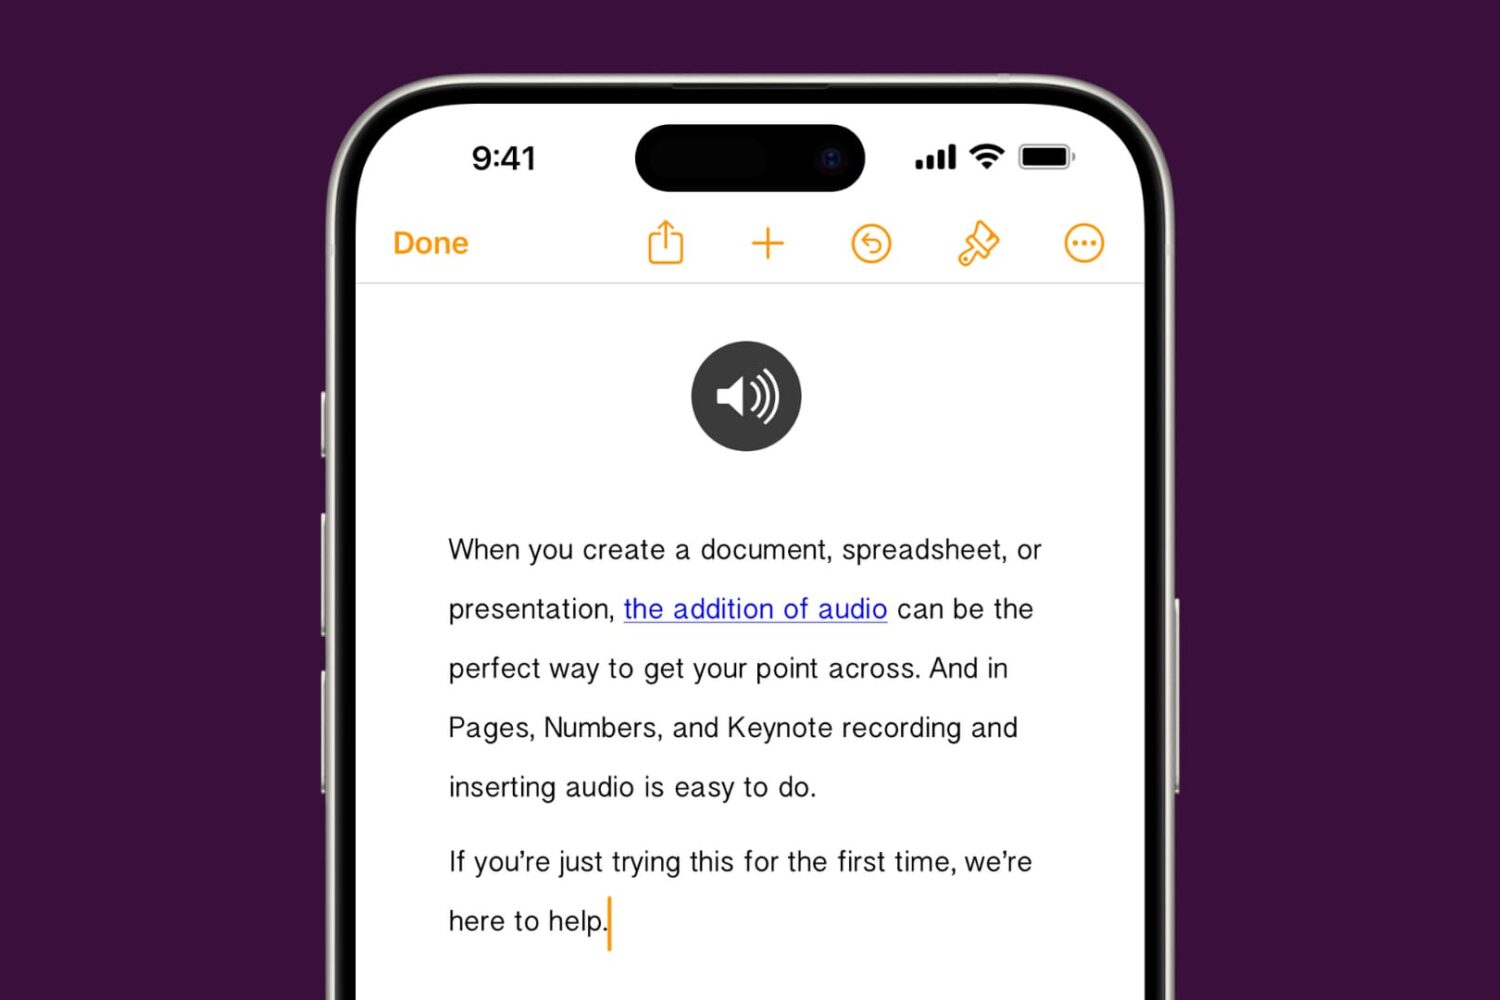 Audio added to a Pages document on iPhone